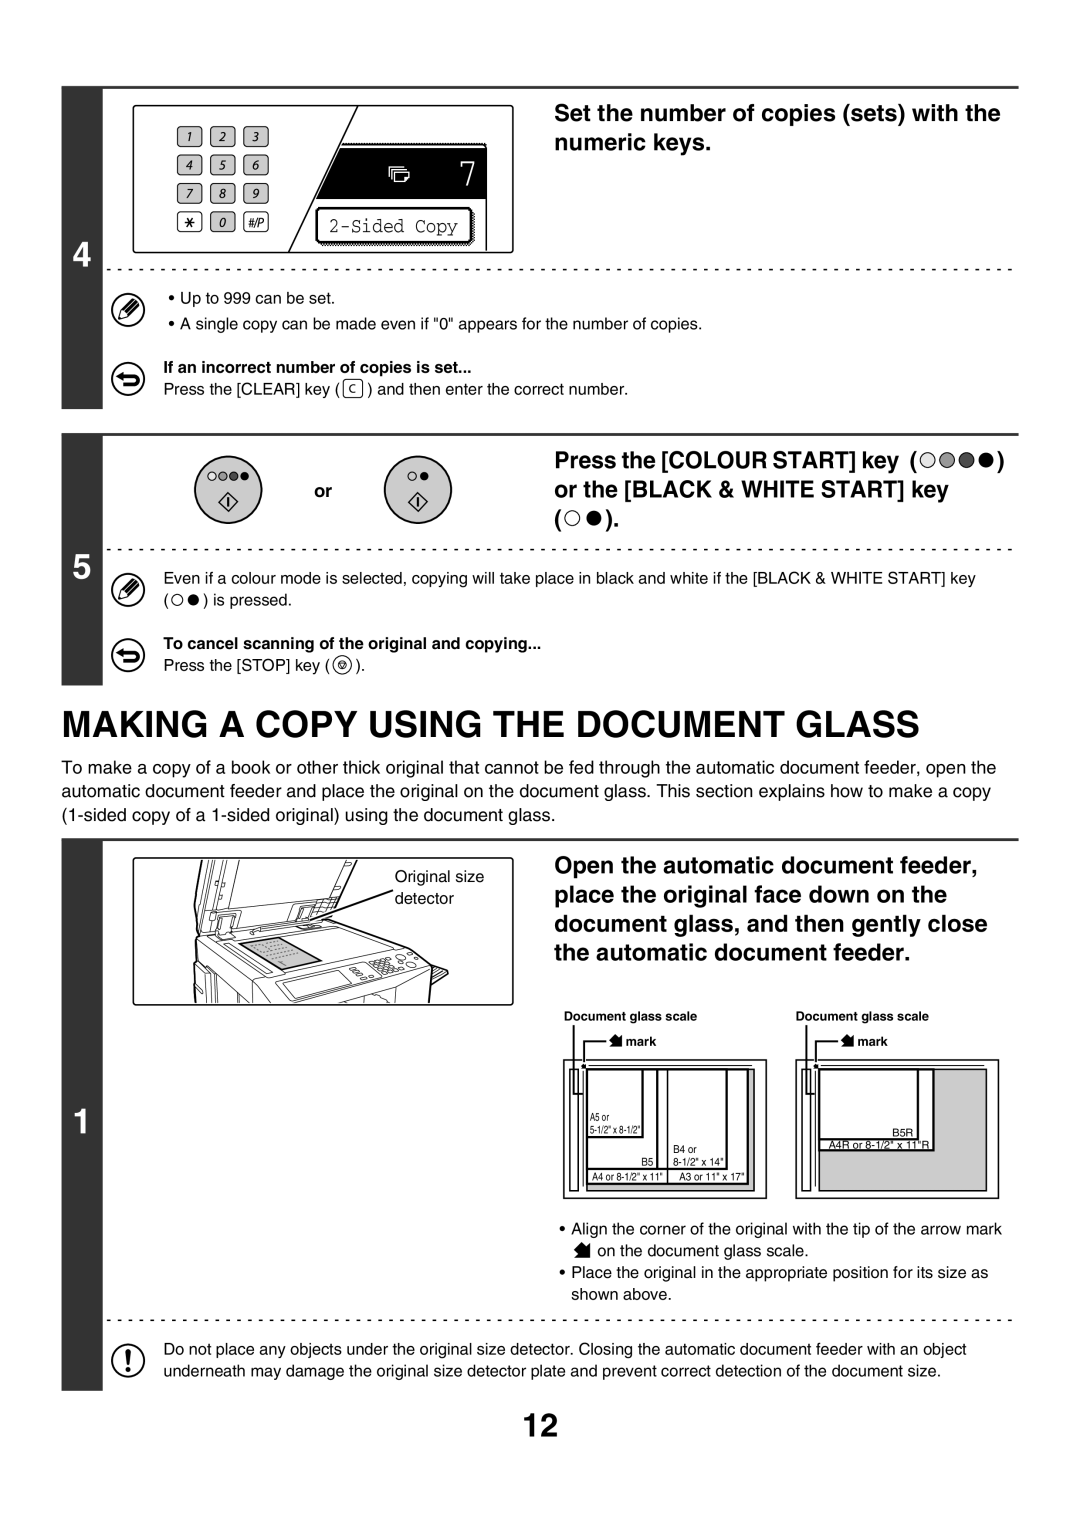 Sharp MX-2700G Making A Copy Using The Document Glass, Set the number of copies sets with the numeric keys, Sided Copy 